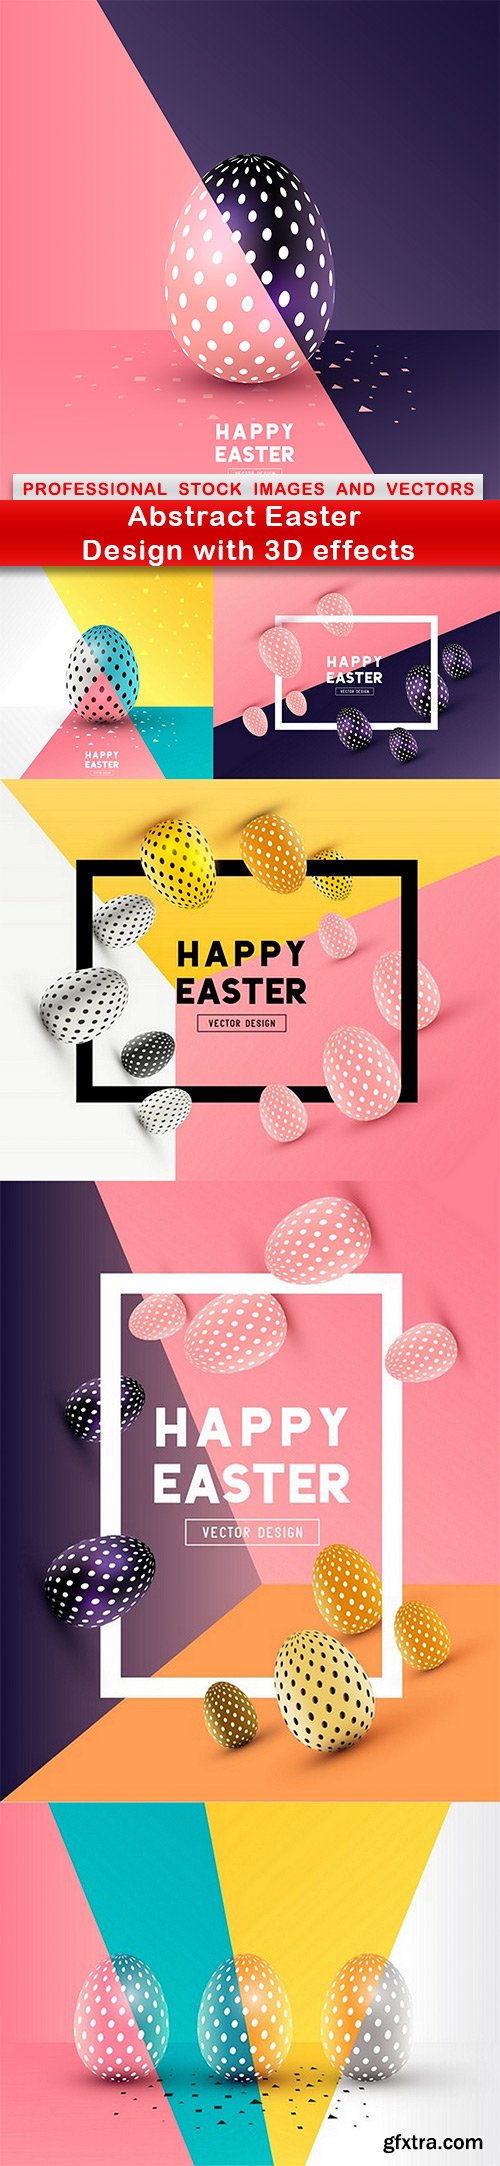 Abstract Easter Design with 3D effects - 6 EPS